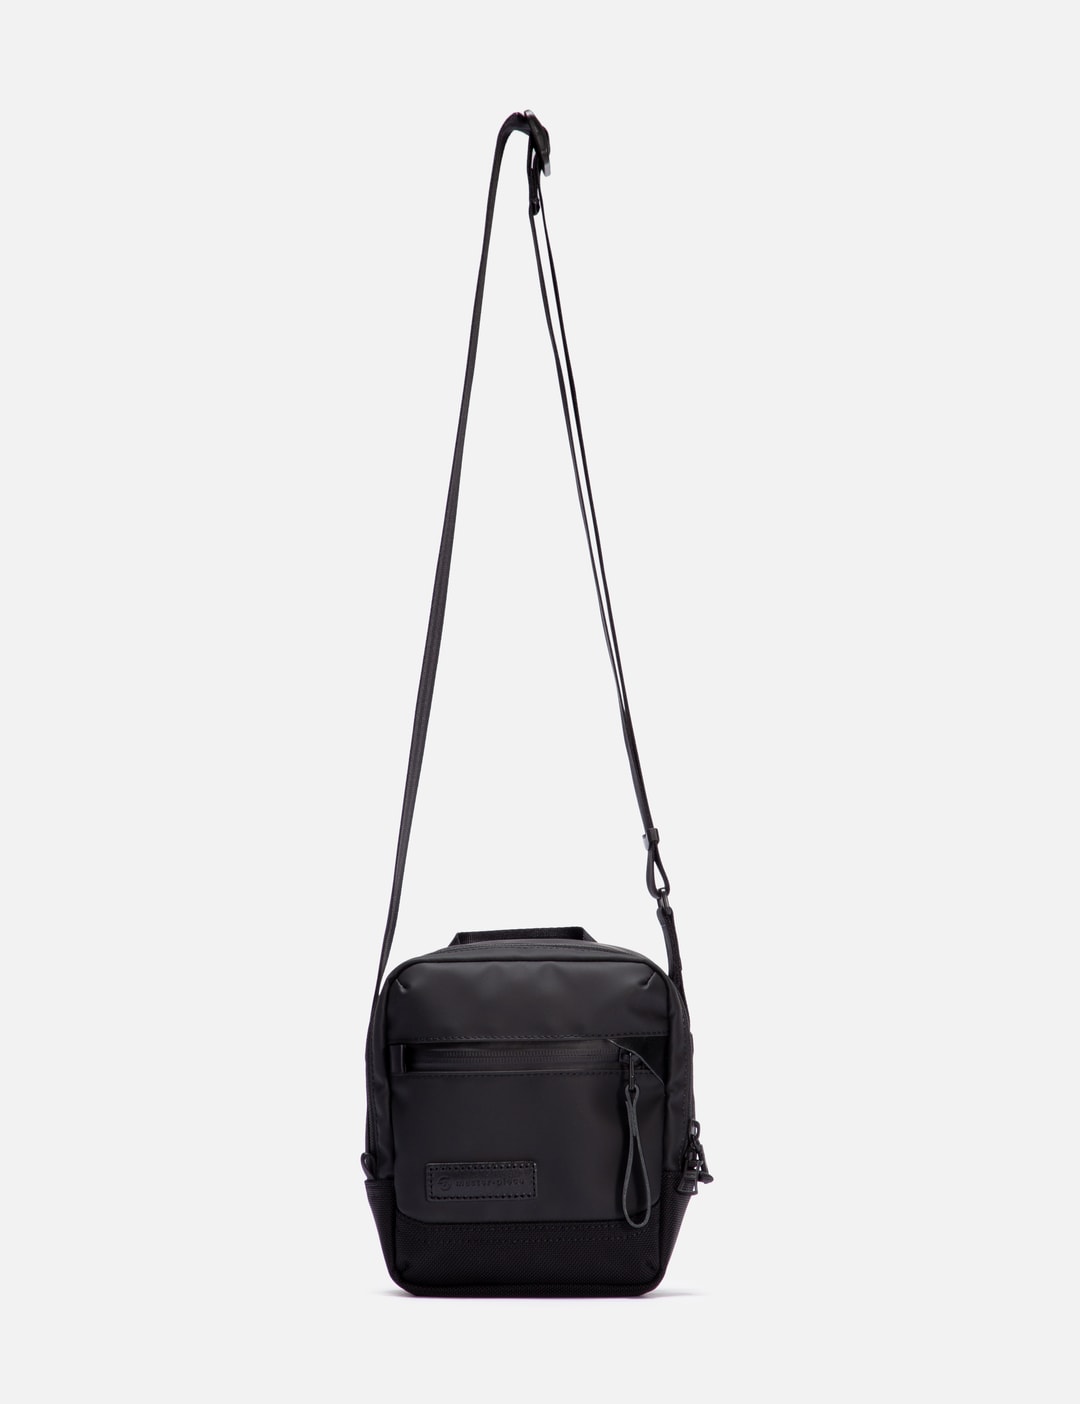 Master Piece - Mini Slick Round Shoulder Bag | HBX - Globally Curated ...